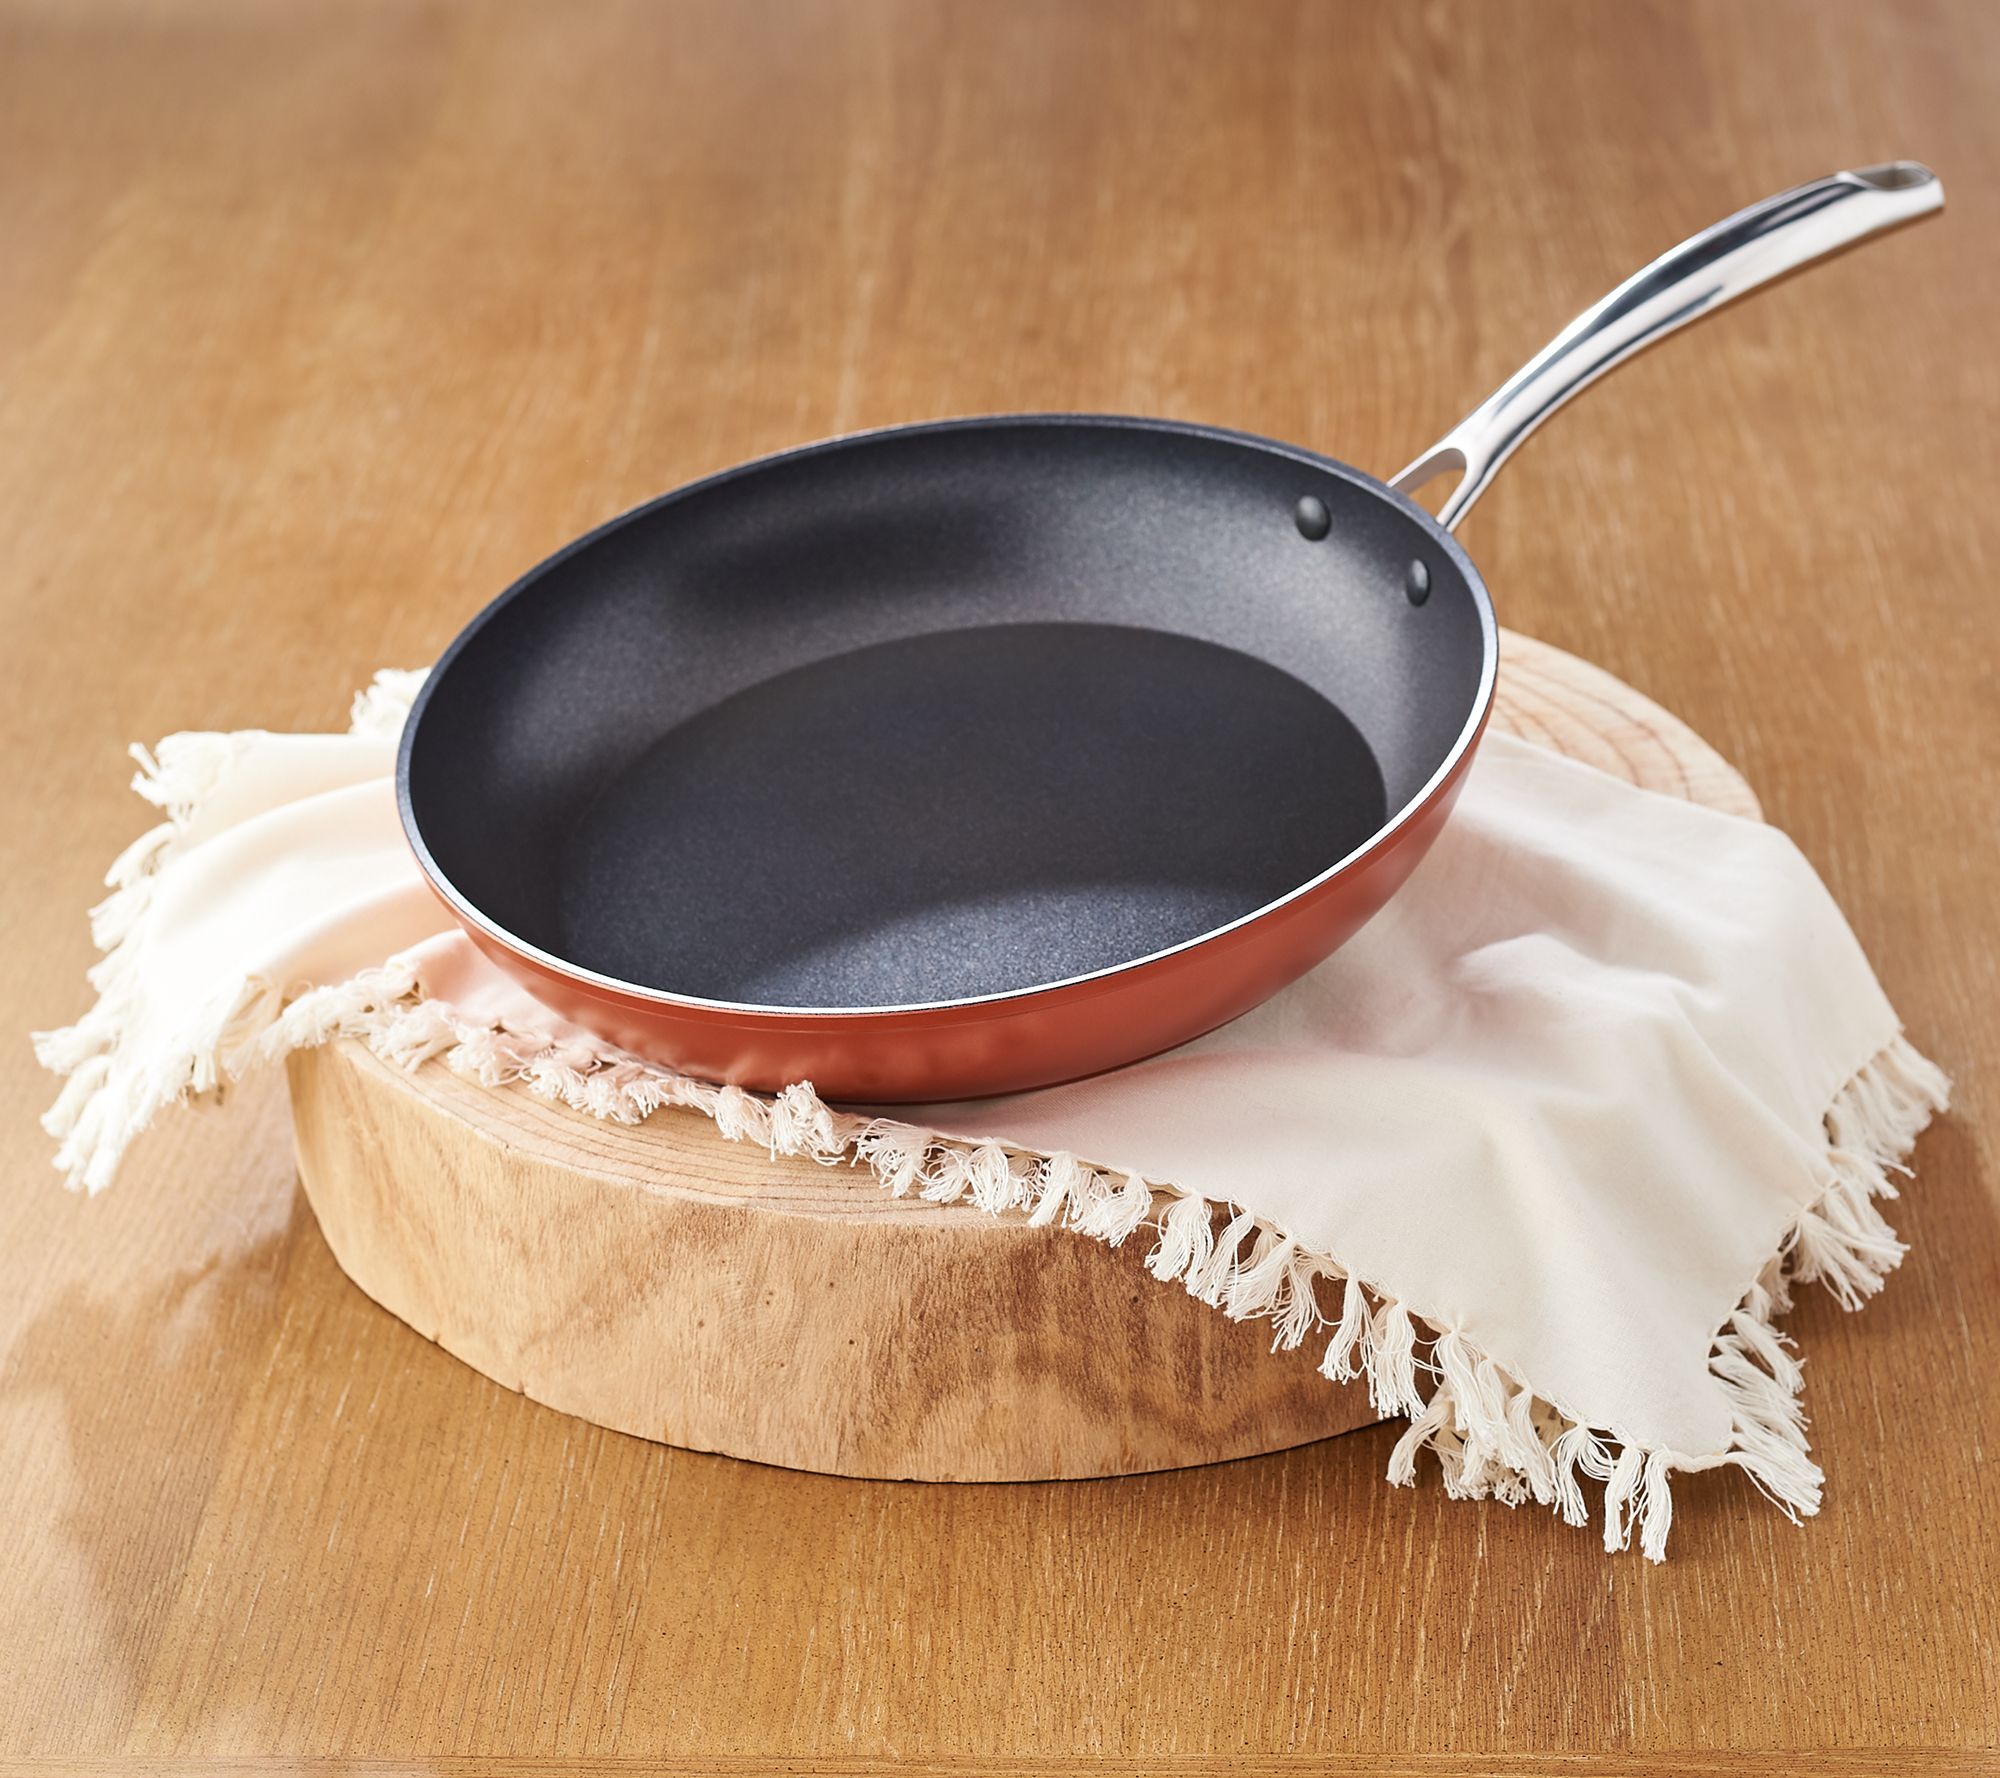 Lehman's Cast Iron Skillet - Nitrogen Hardened Cookware, Tough But Lightweight, No Need to Season, Silicone Safety Handle Included - 12 inch